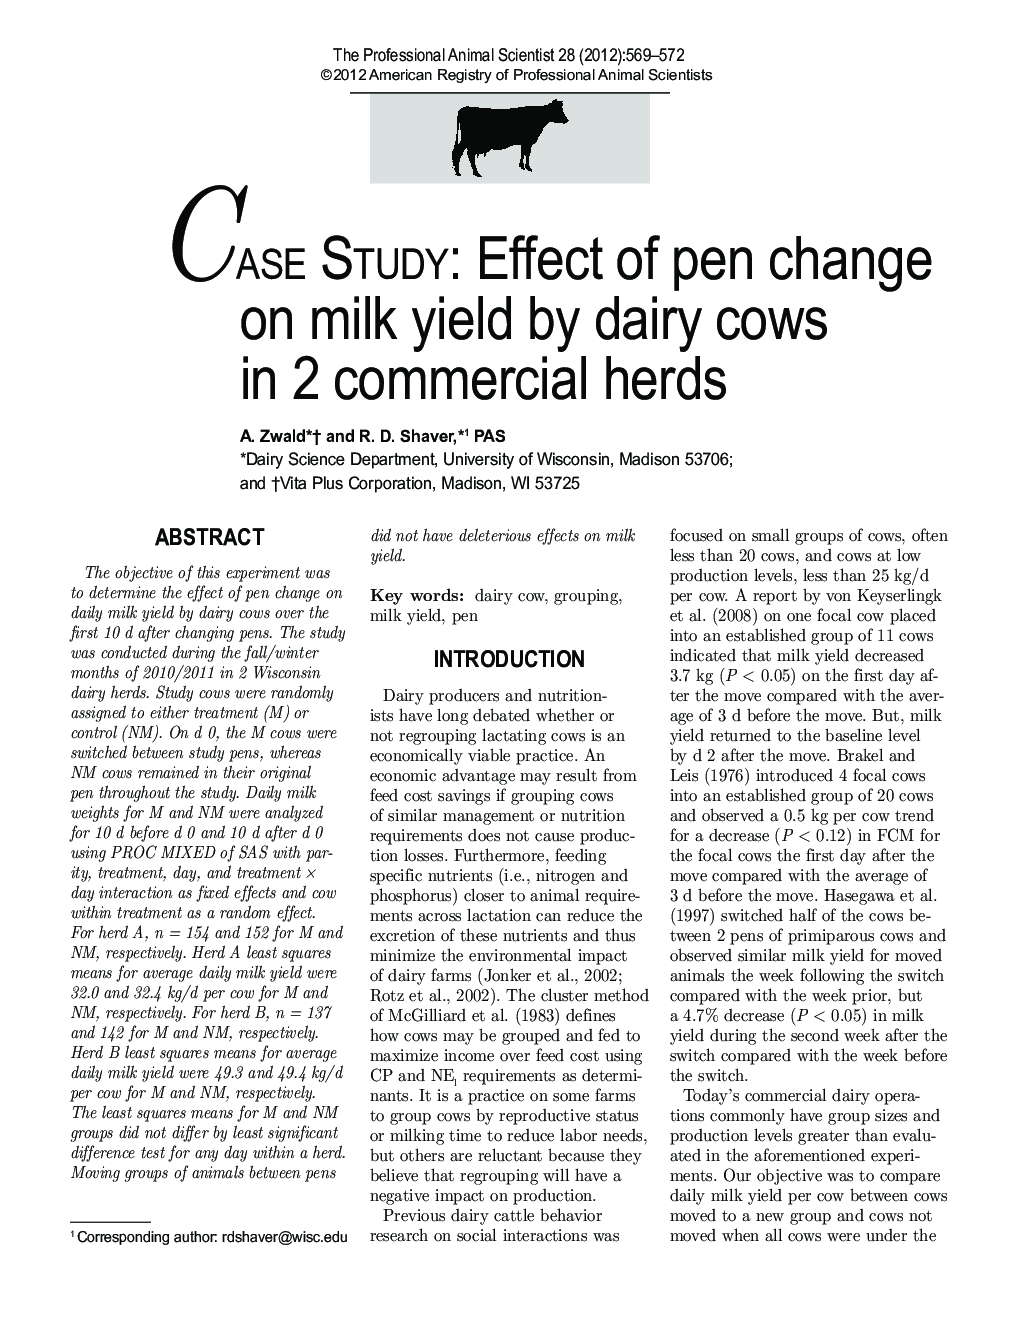 CASE STUDY: Effect of pen change on milk yield by dairy cows in 2 commercial herds